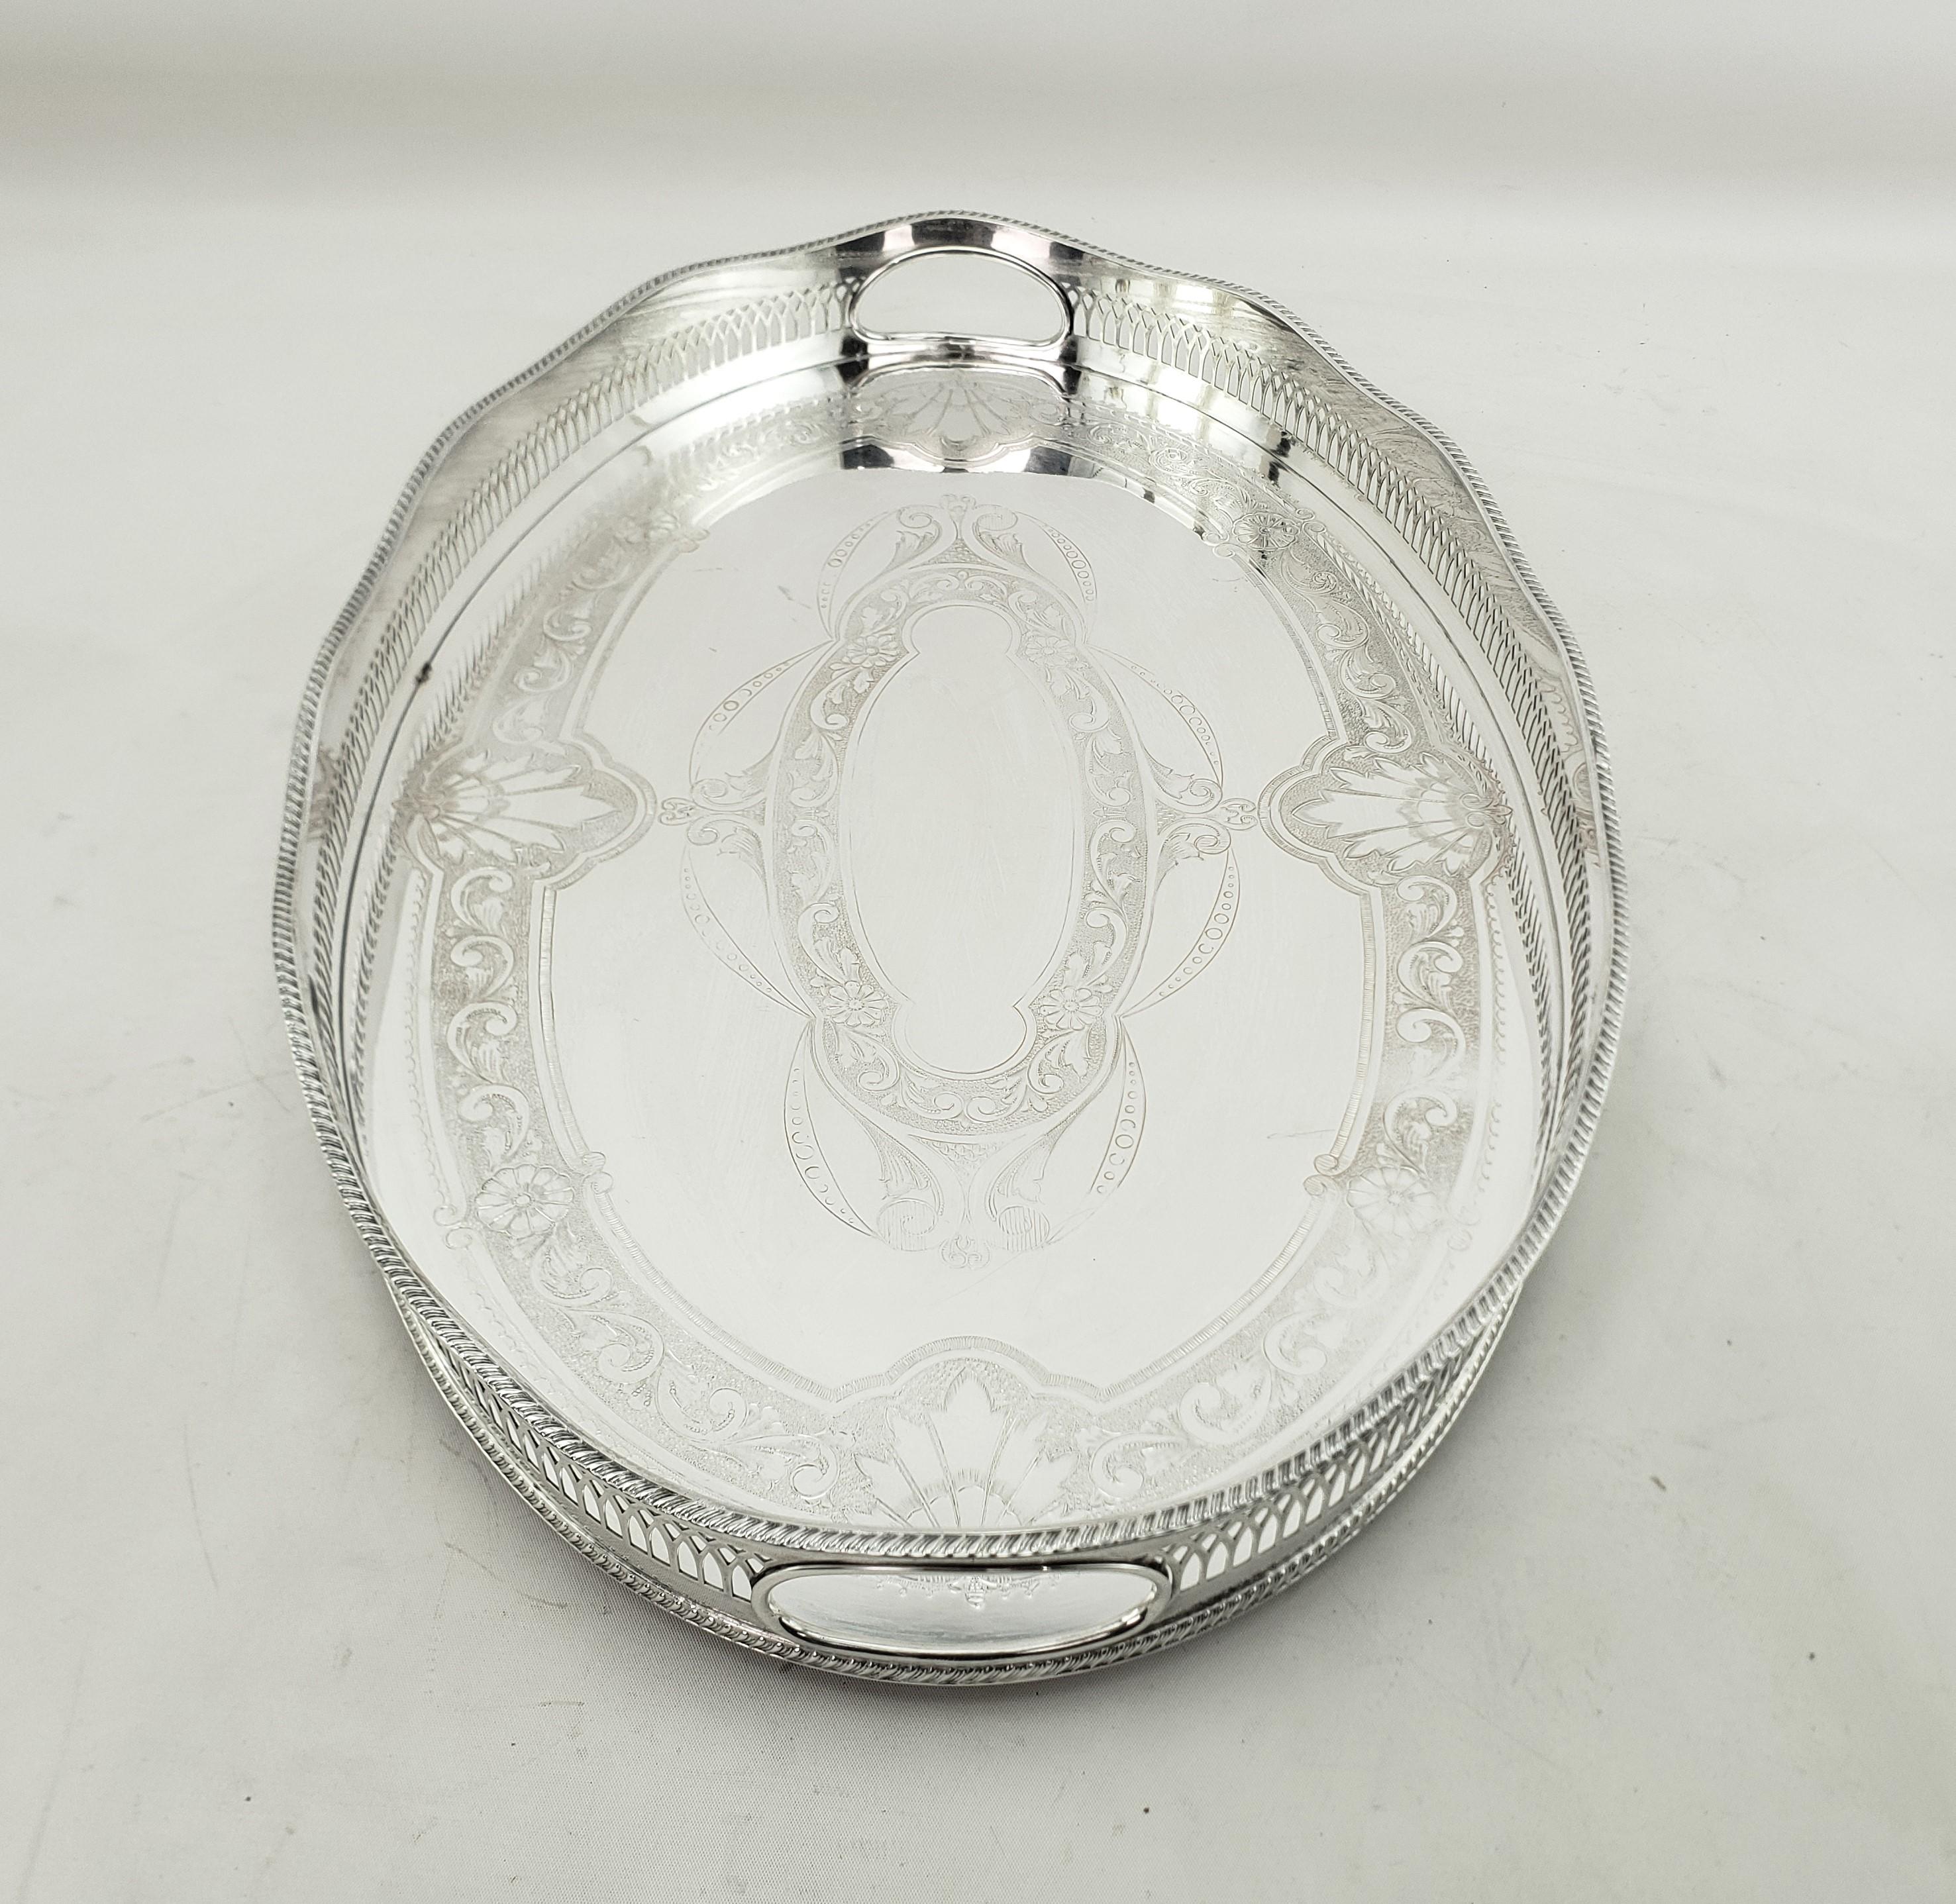 20th Century Antique Stylied English Oval Silver Plated Gallery Serving Tray